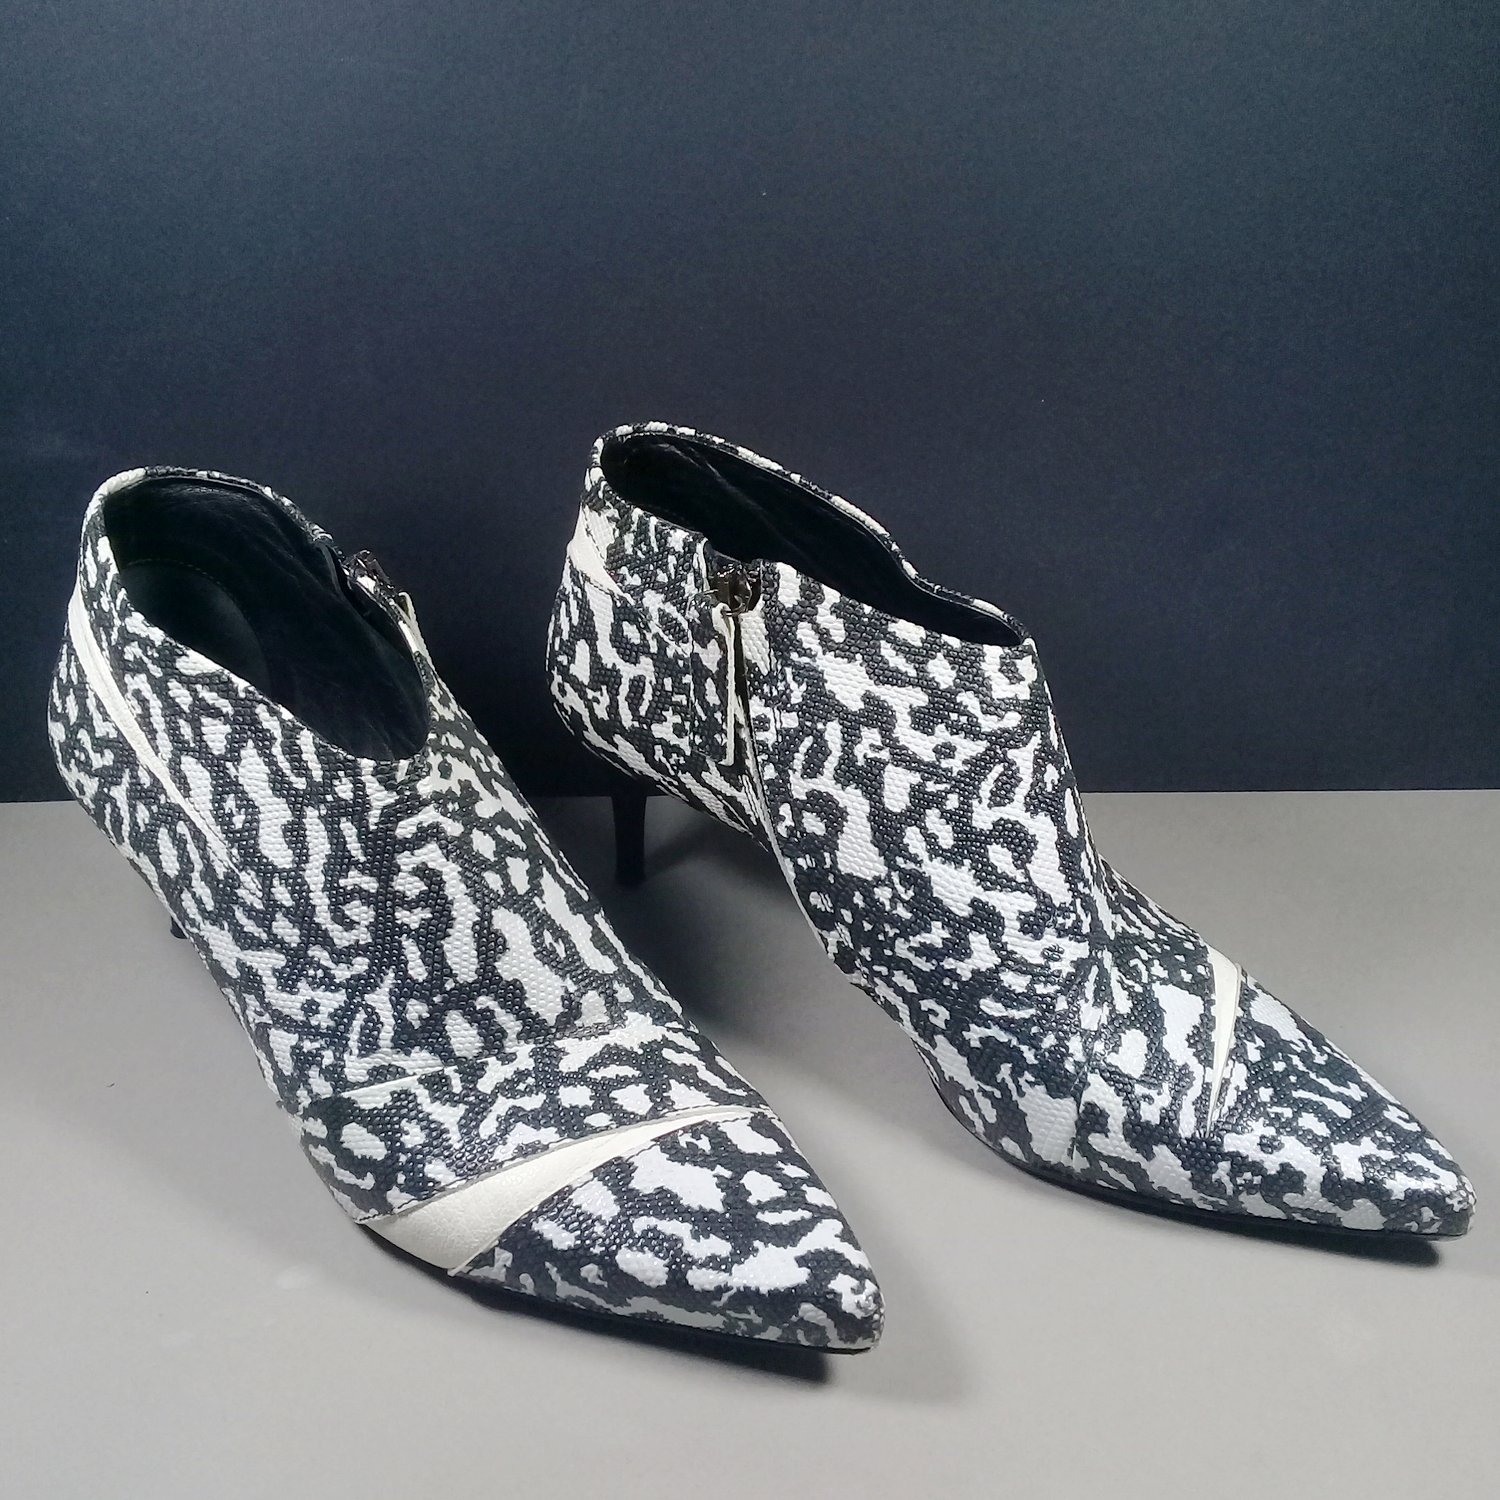 McQ by Alexander McQueen Shear Bootie 55 B&W Print Ankle Boots Sz. 39